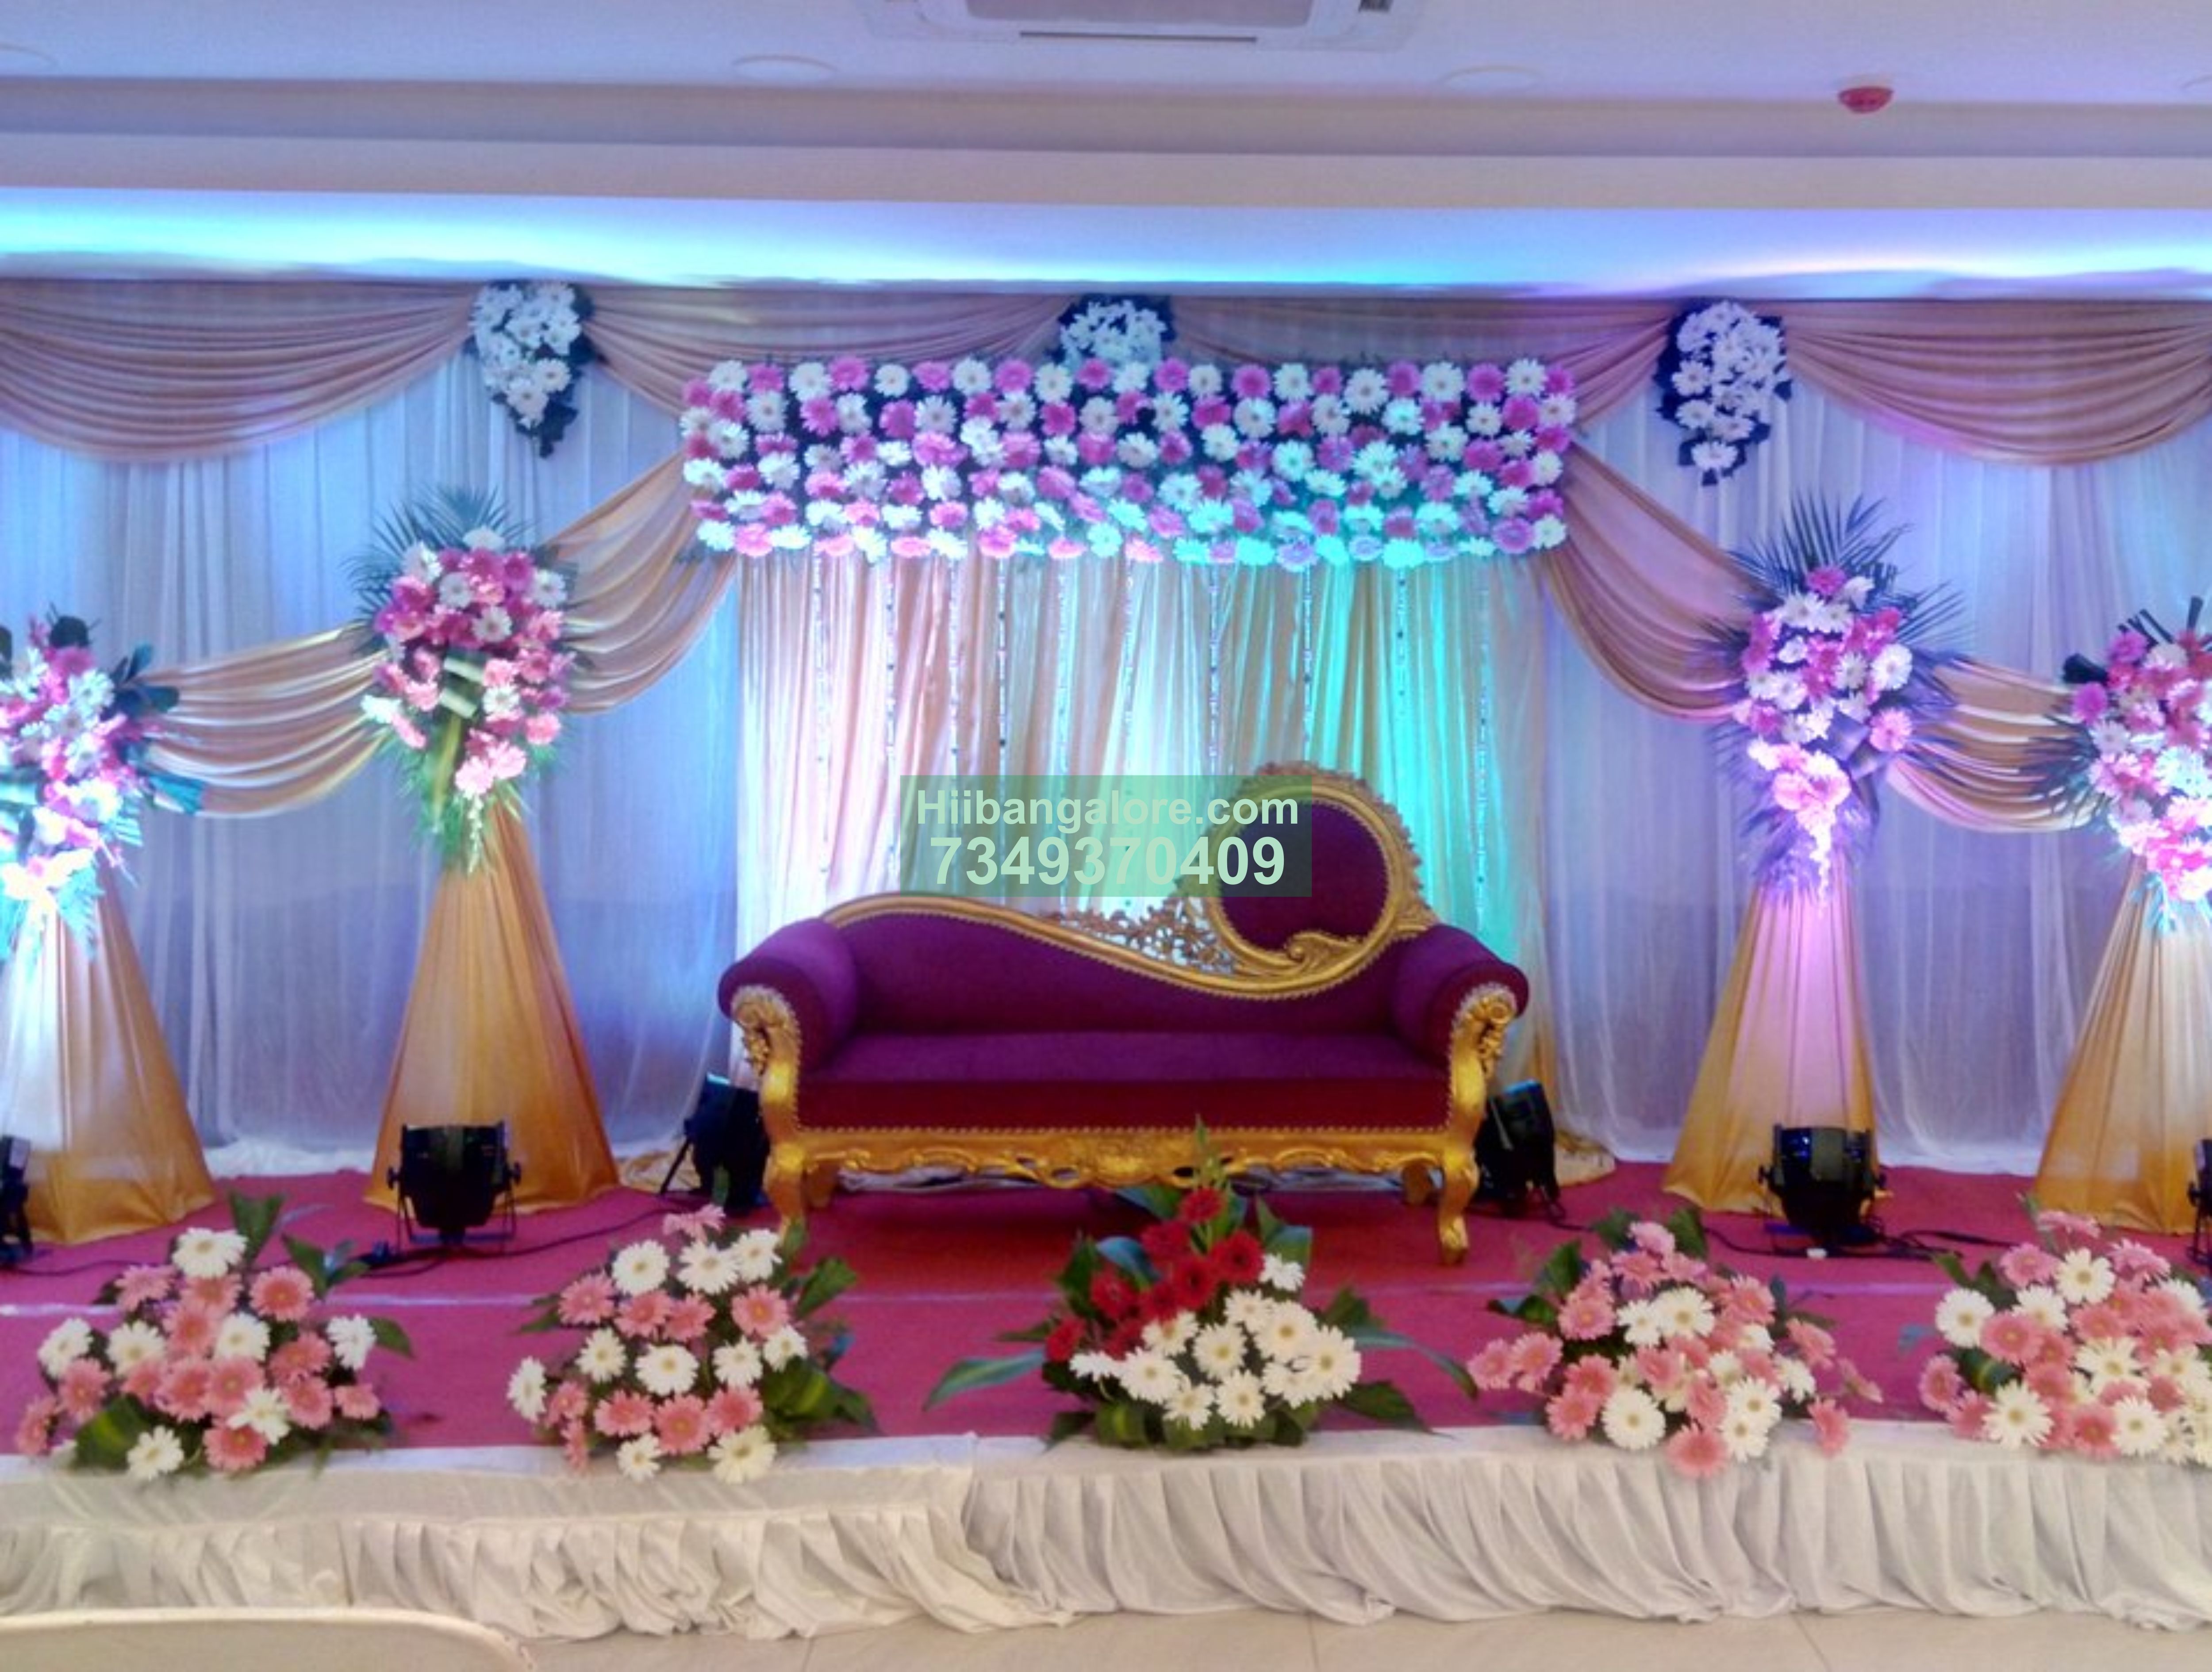 Grand engagement floral decoration for party hall Bangalore